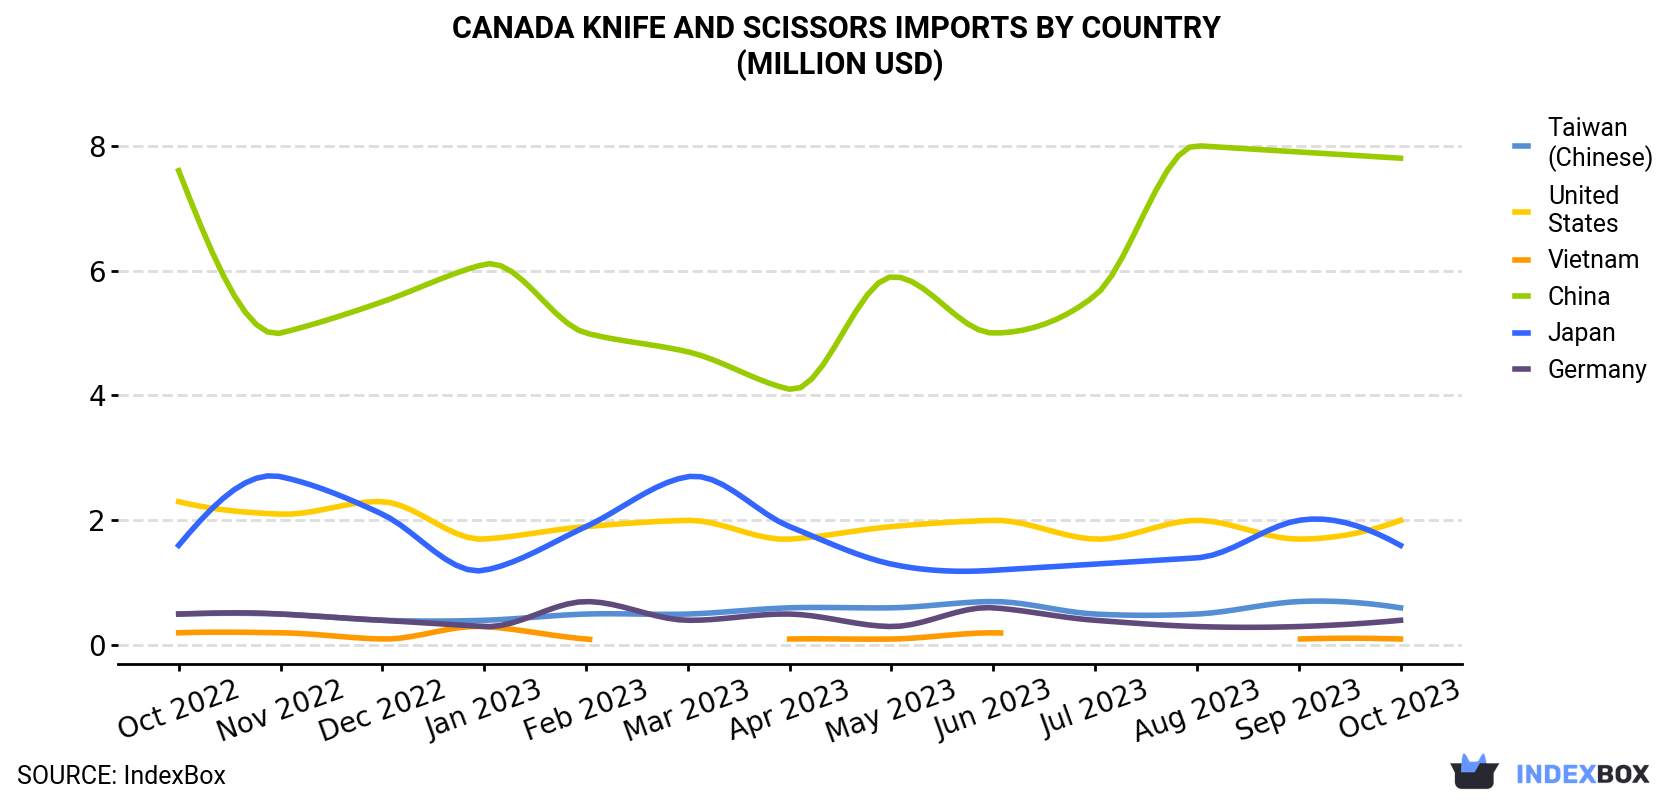 Canada Knife And Scissors Imports By Country (Million USD)